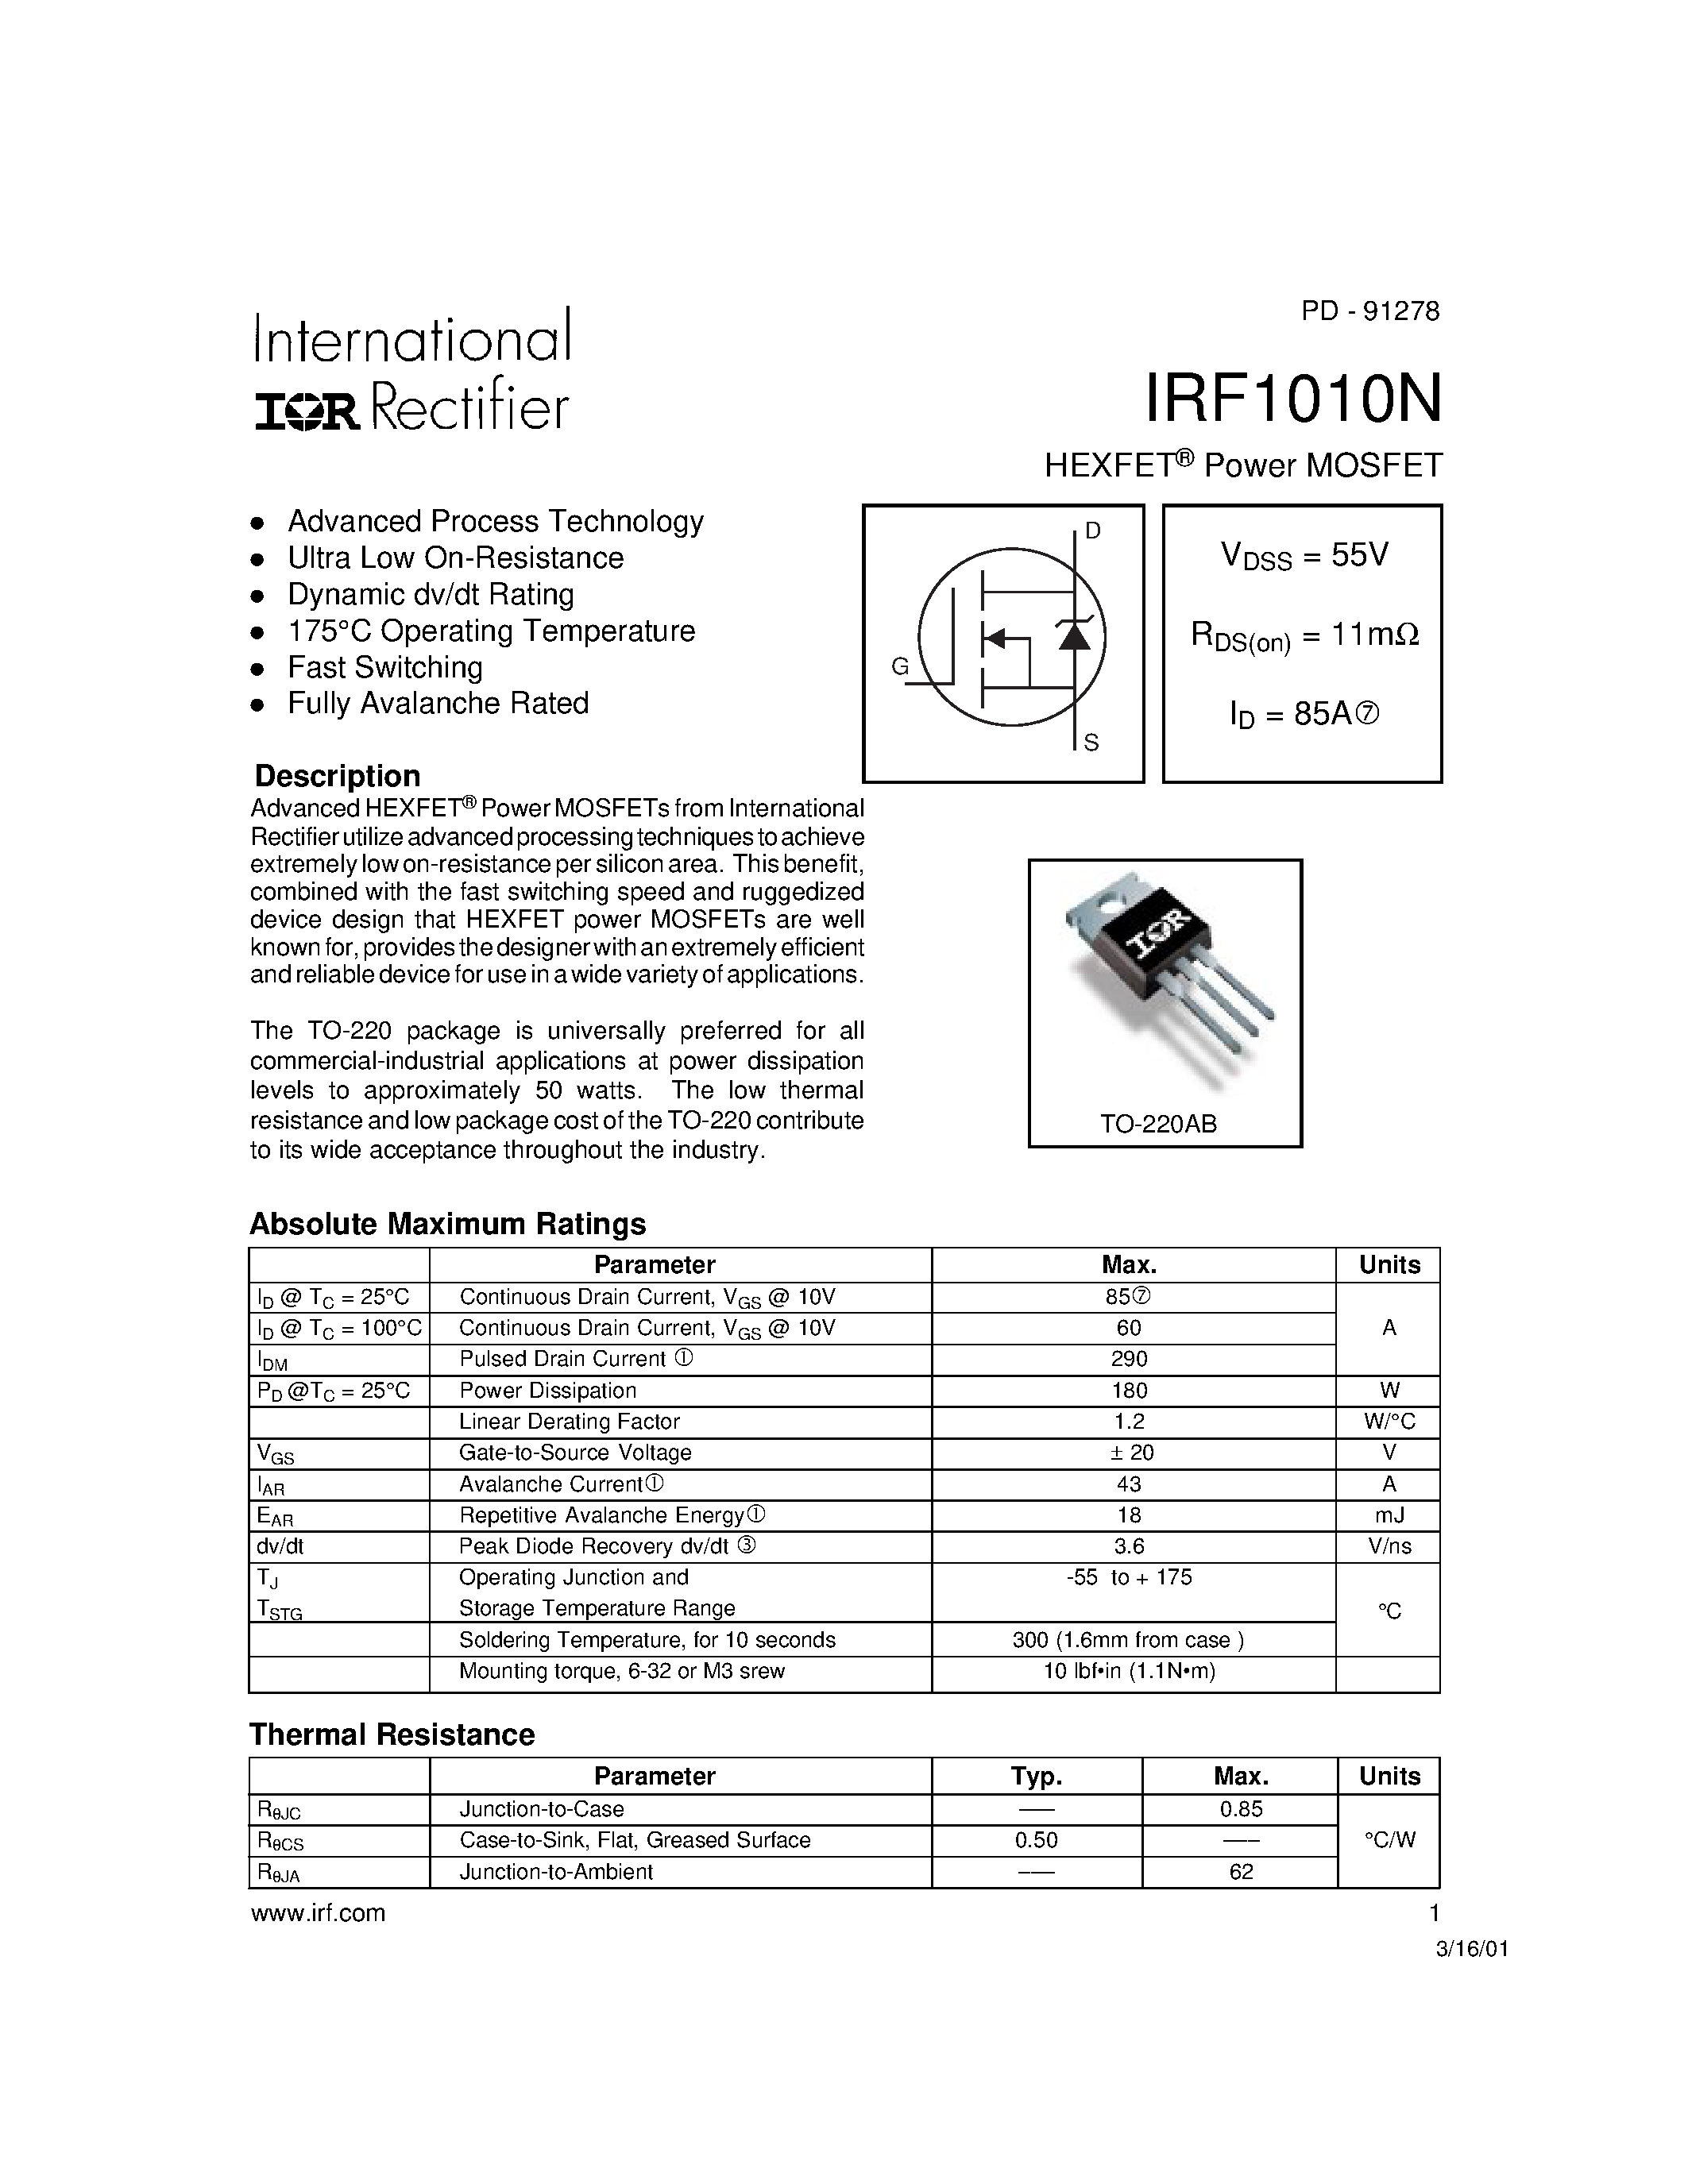 Даташит IRF1010N - Power MOSFET(Vdss=55V/ Rds(on)=11mohm/ Id=85A) страница 1